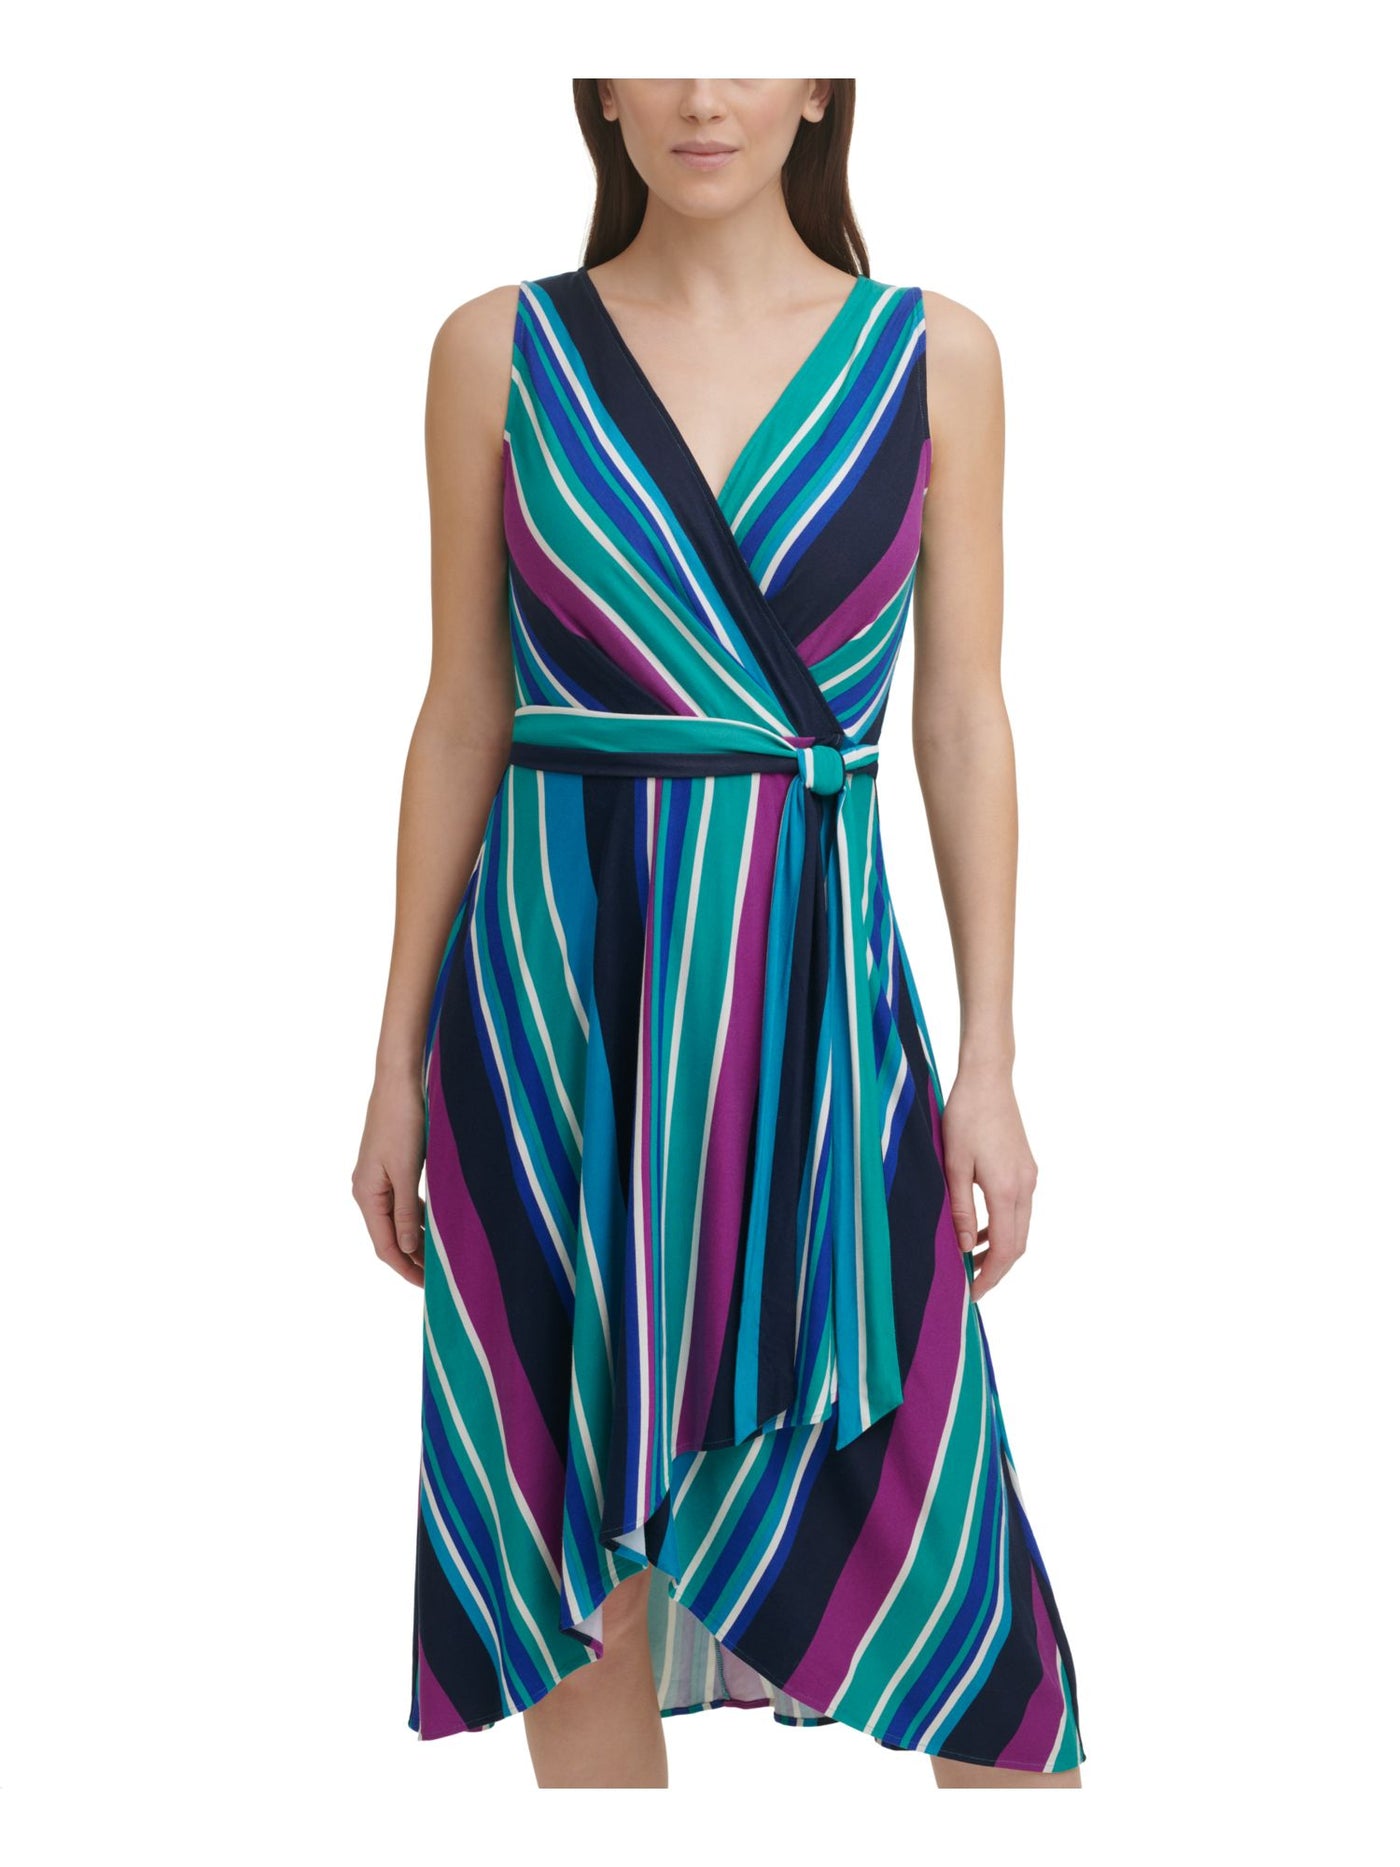 DKNY Womens Turquoise Stretch Belted Unlined Striped Sleeveless Surplice Neckline Midi Evening Wrap Dress L